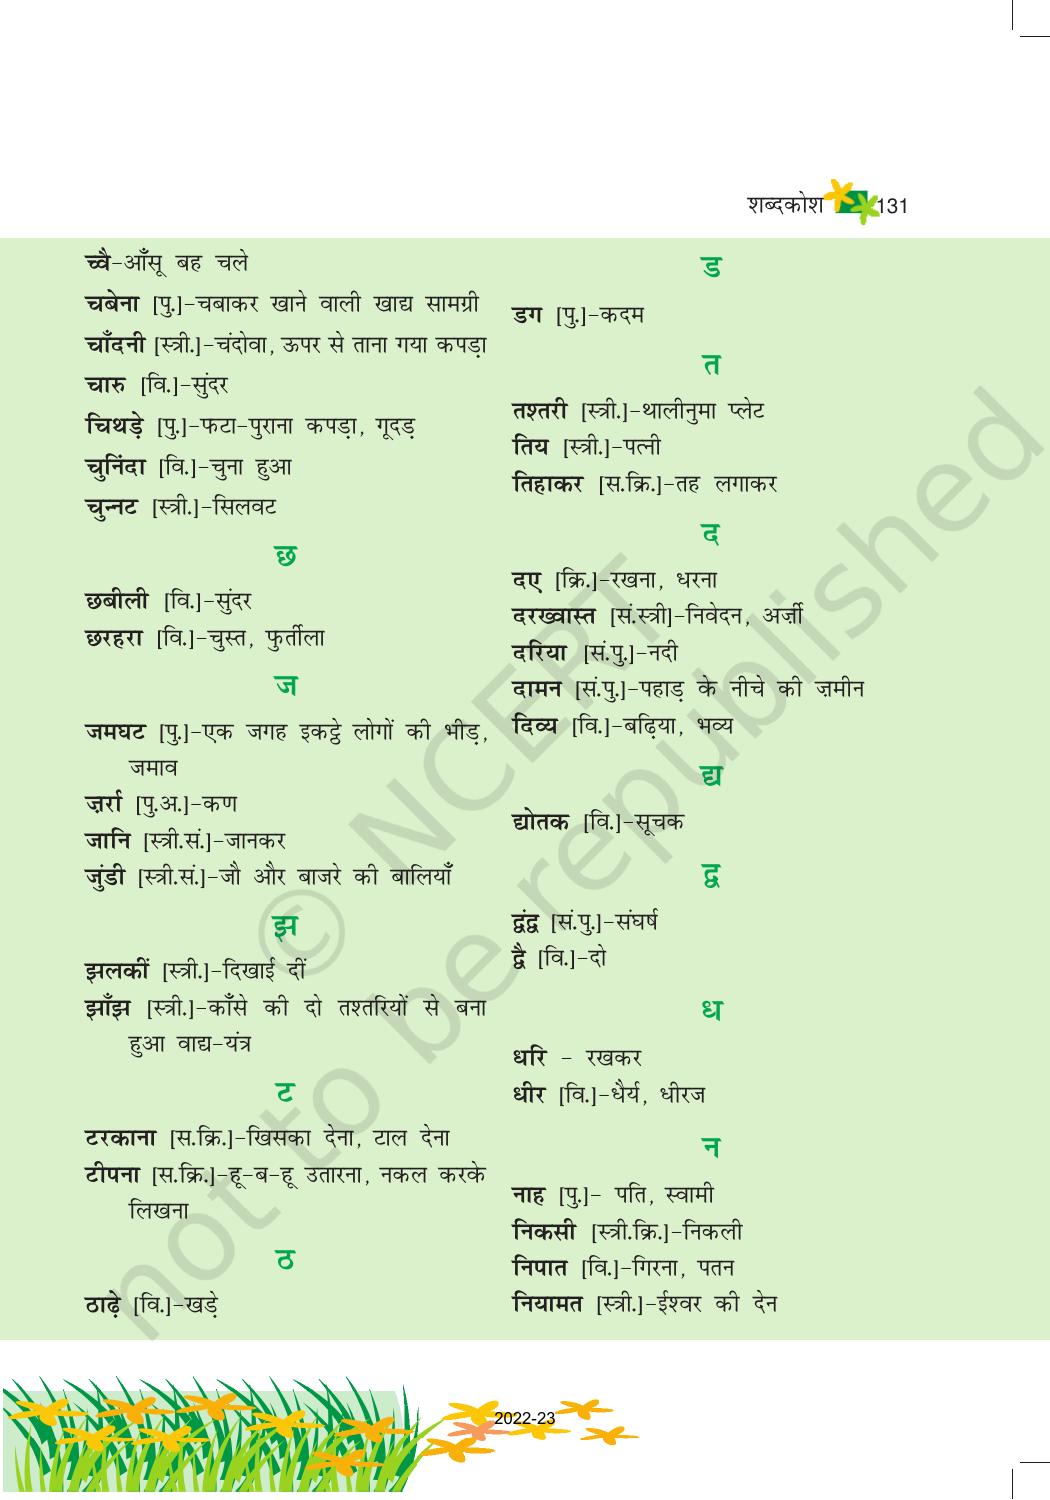 NCERT Book for Class 6 Hindi(Vasant Bhag 1) : Chapter 17-साँस – साँस में बांस - Page 14